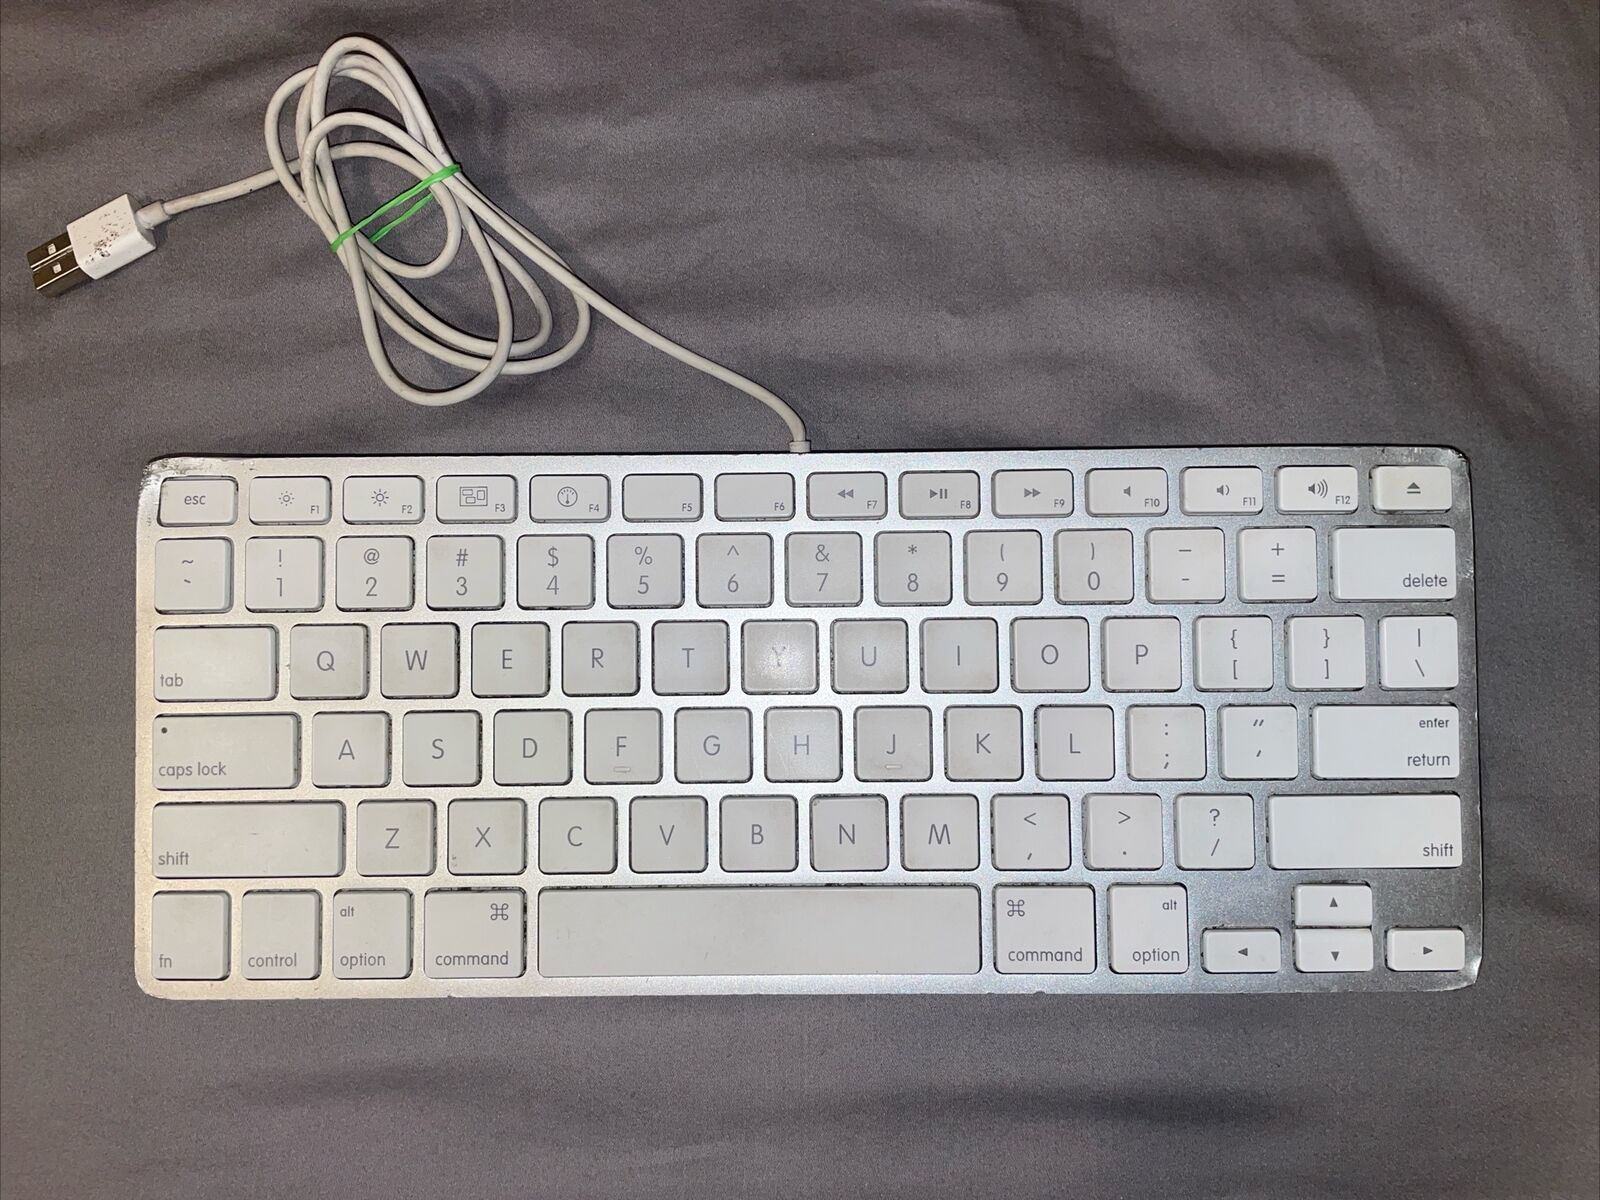 Genuine Apple USB Wired Keyboard A1242 With USB ports -some damage - FOR PARTS